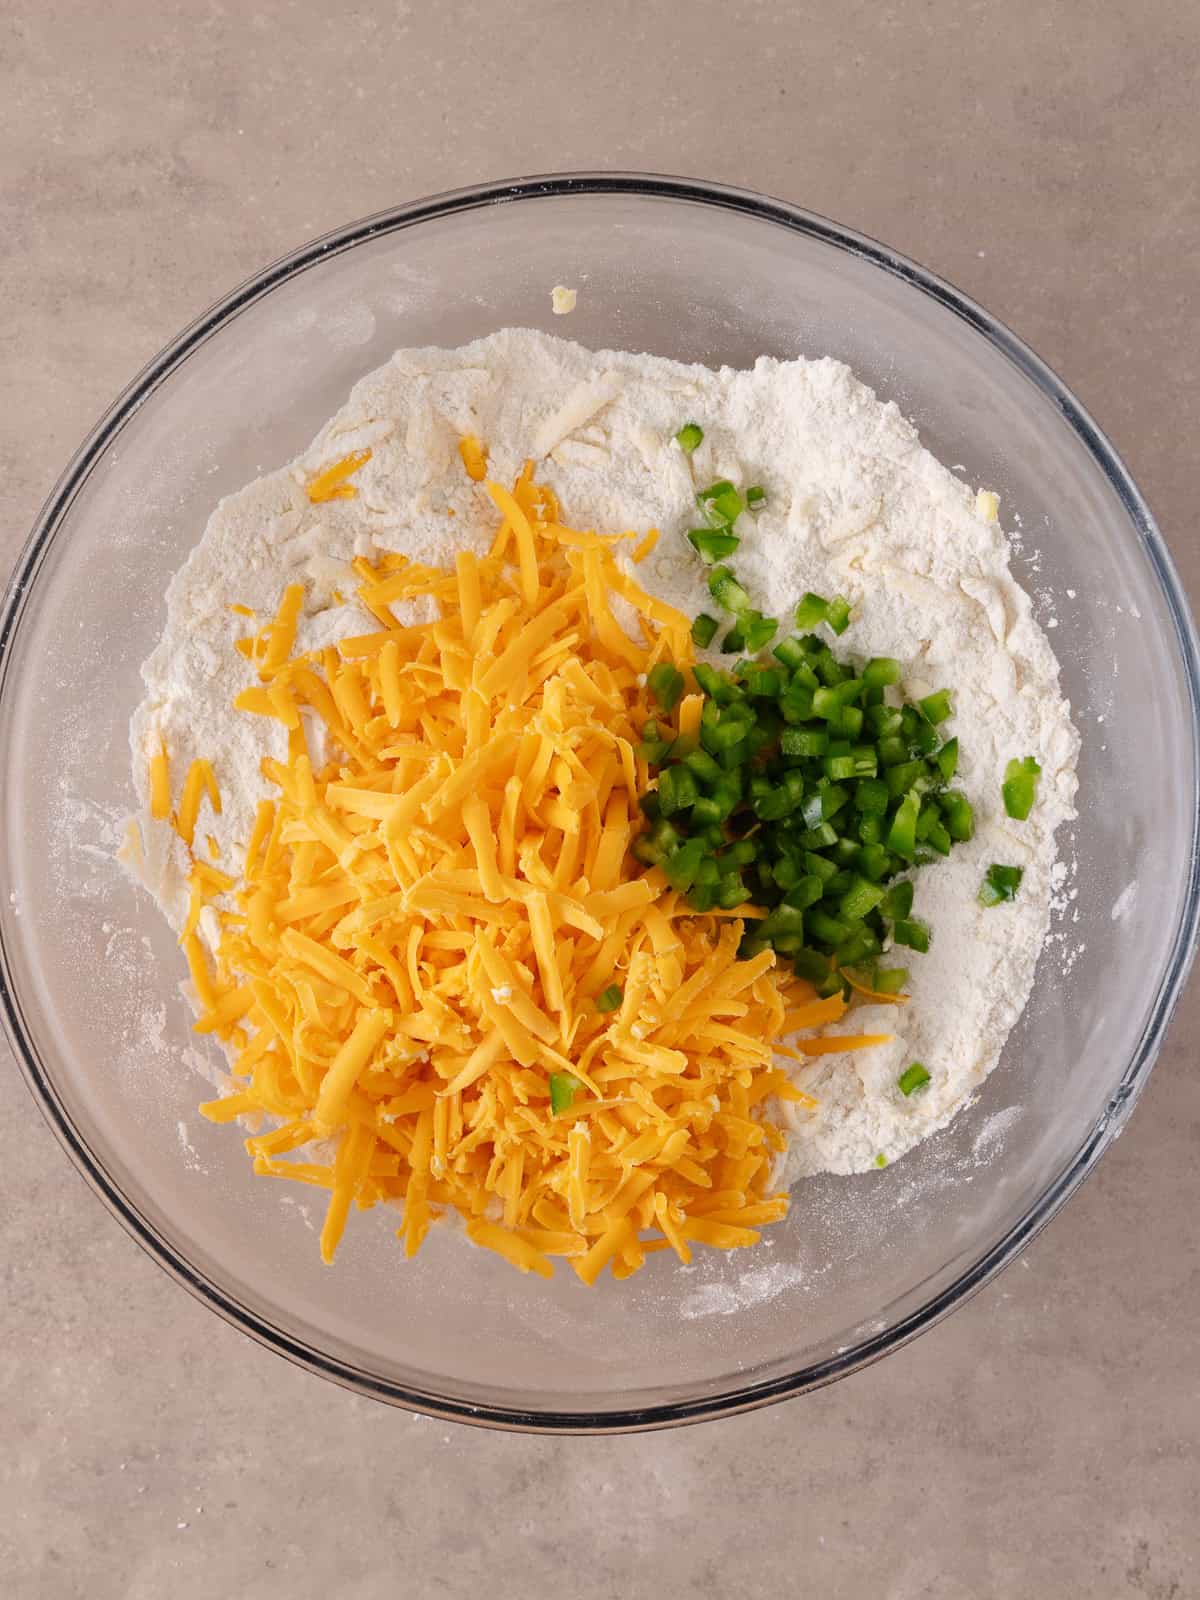 Shredded cheddar cheese and finely chopped fresh jalapenos are added to the bowl with the flour mixture.